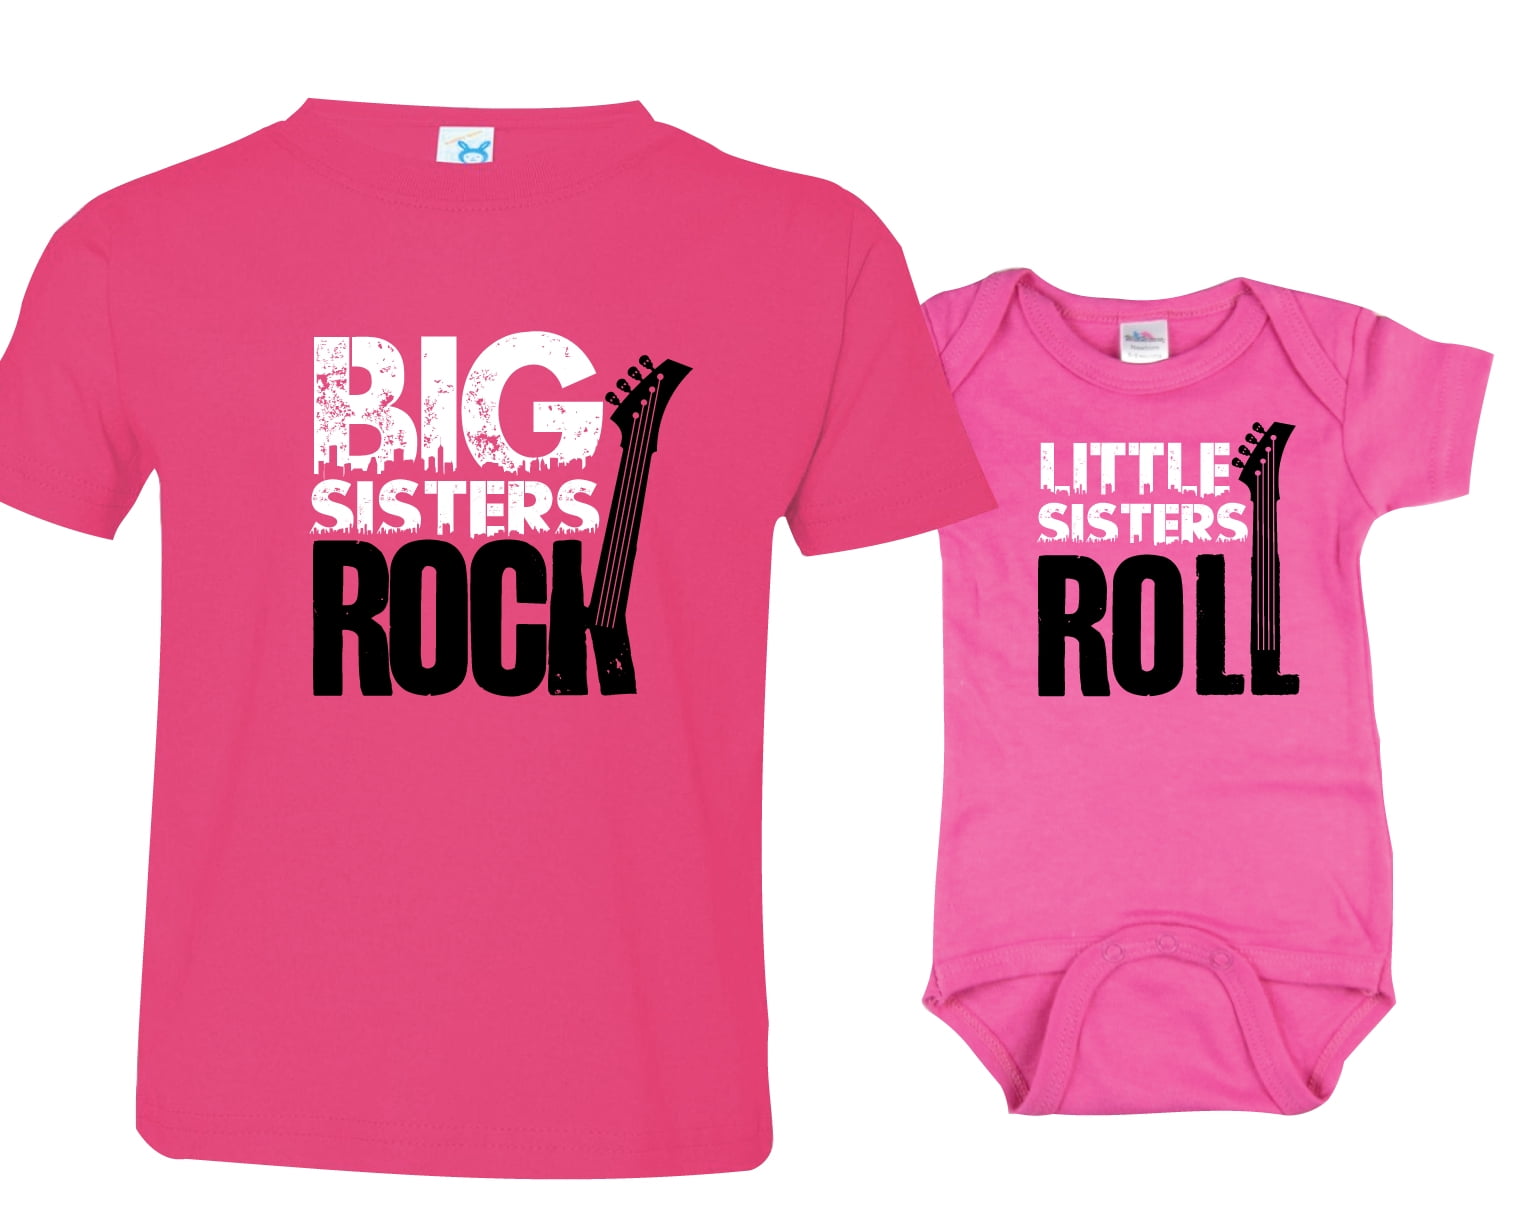 Nursery Decals and More Rock and Roll Siblings Set Big Brother Little Brother Shirts Matching Outfits for Siblings